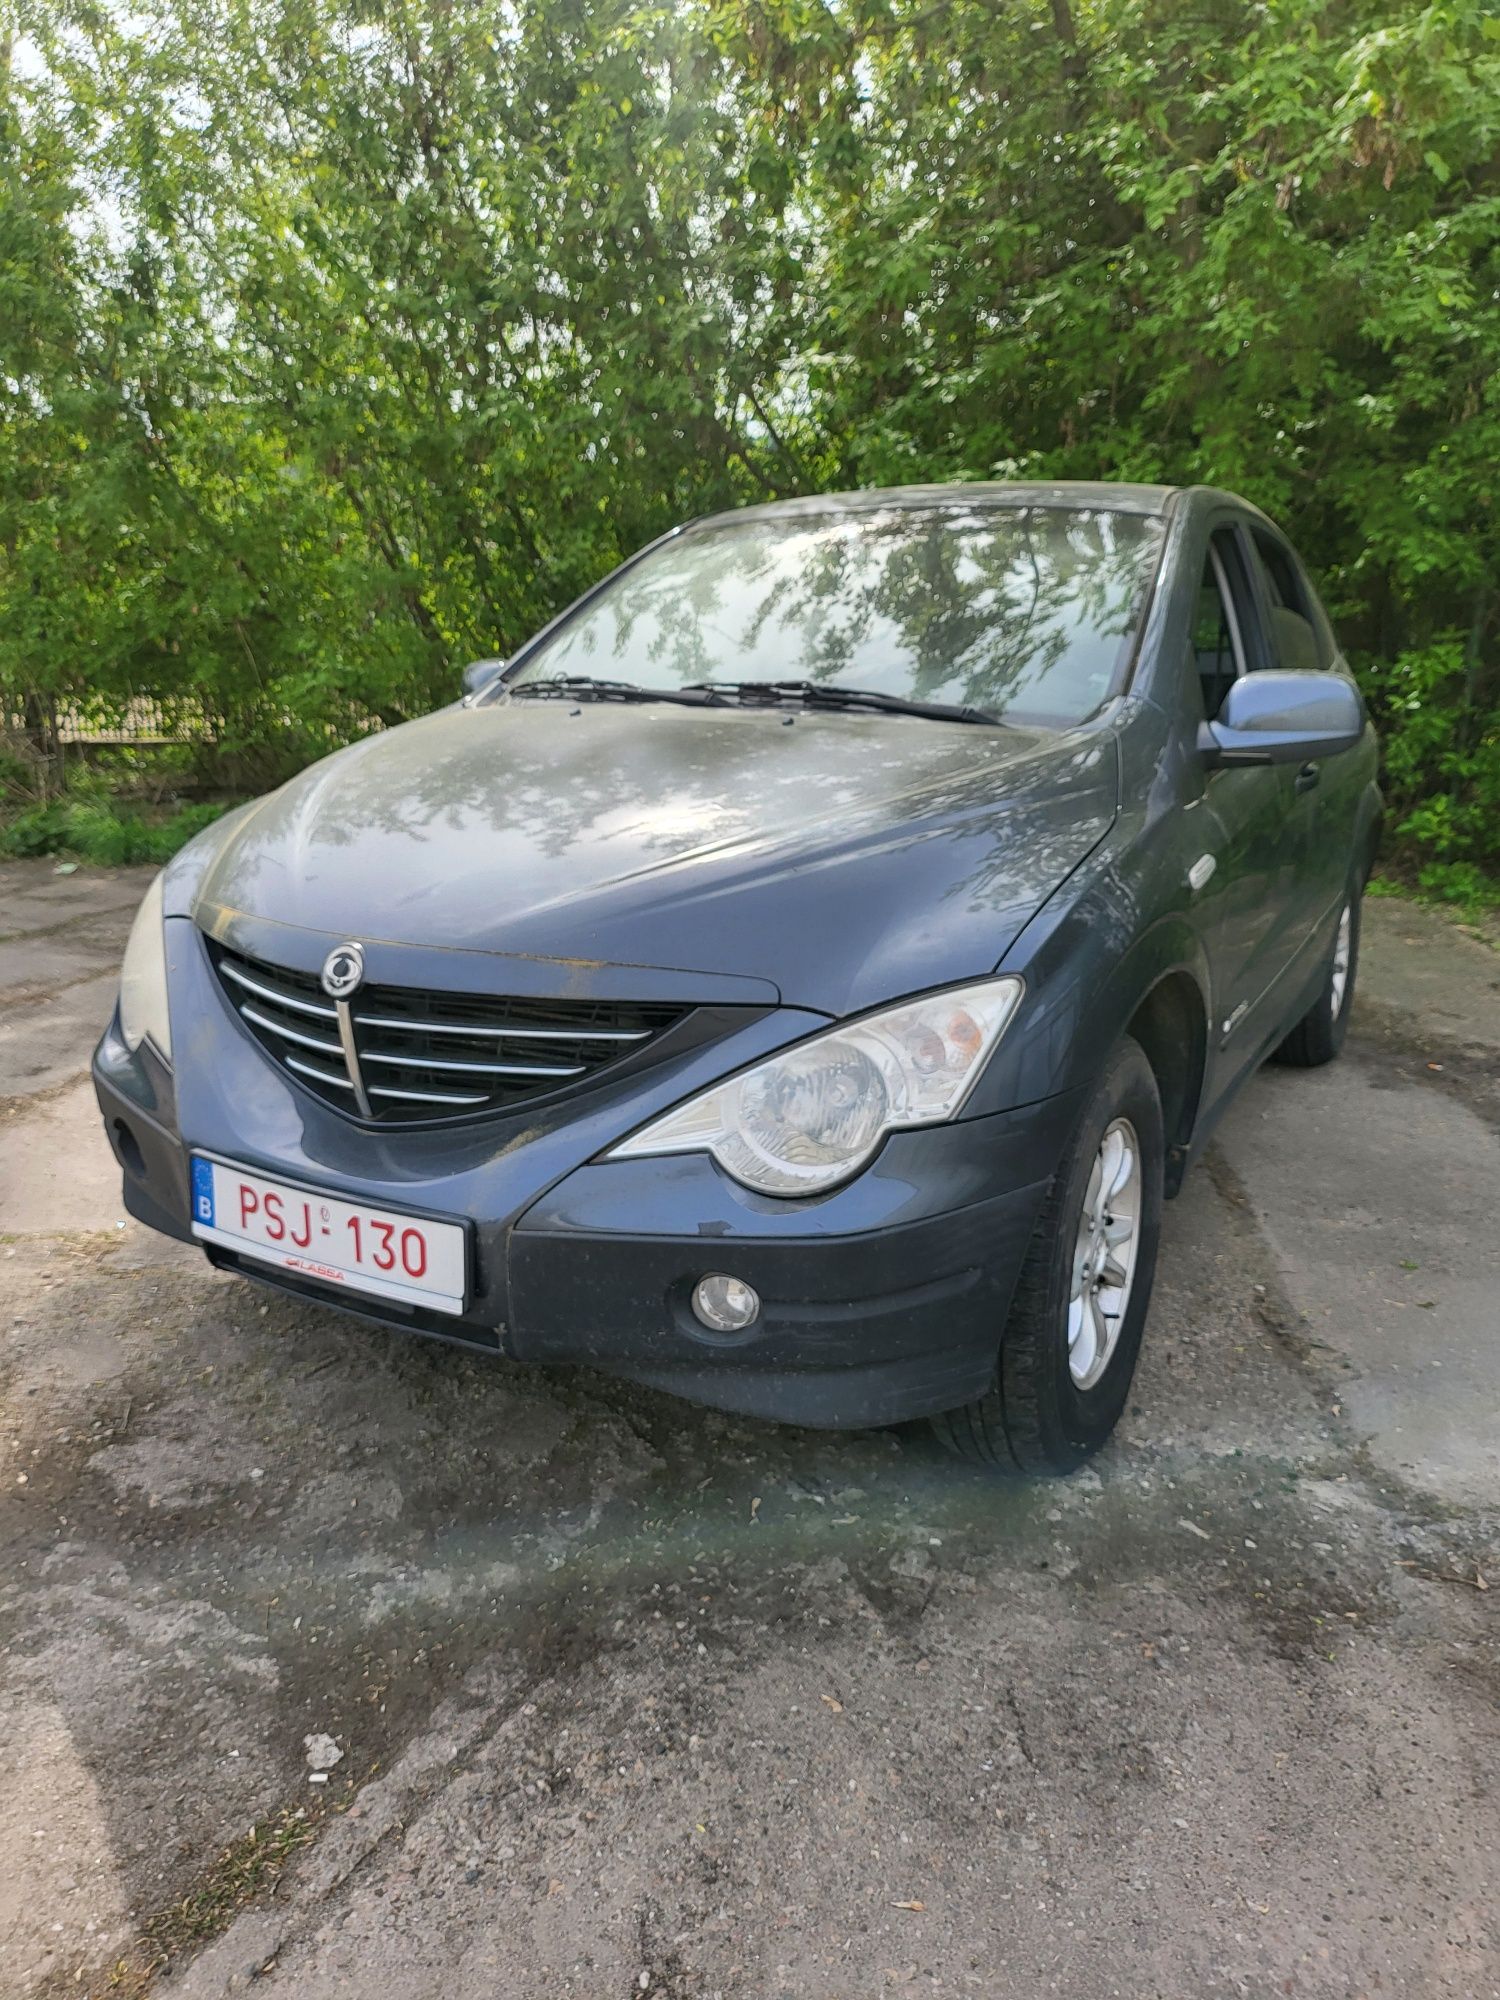 Ssangyong  Actyon 2007 r.